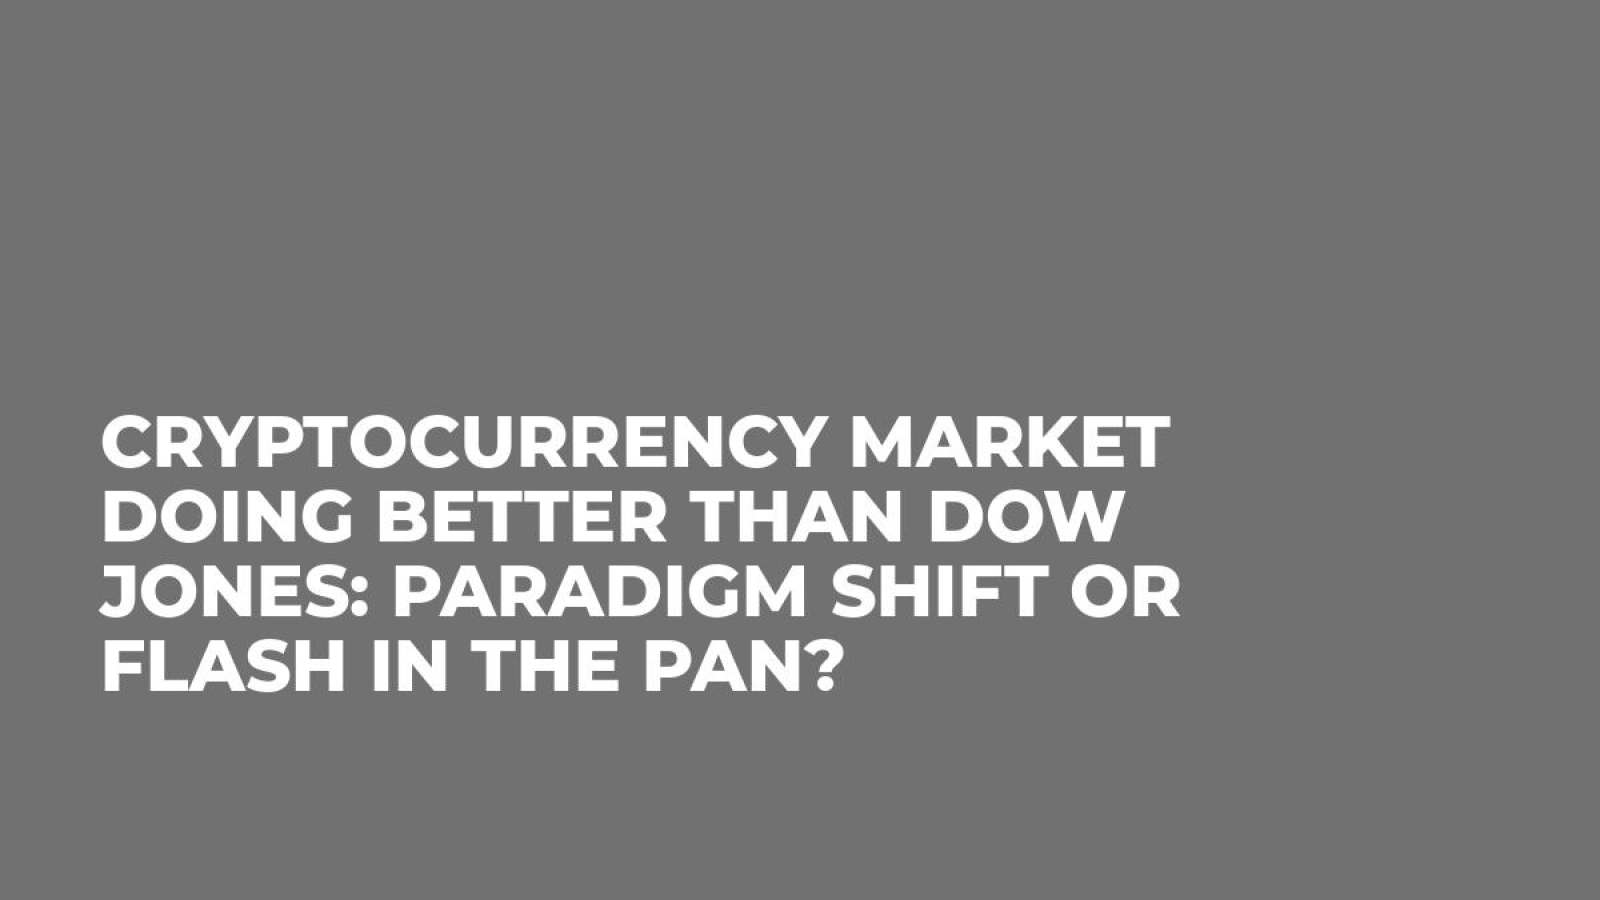 Cryptocurrency Market Doing Better Than Dow Jones: Paradigm Shift or Flash in the Pan?